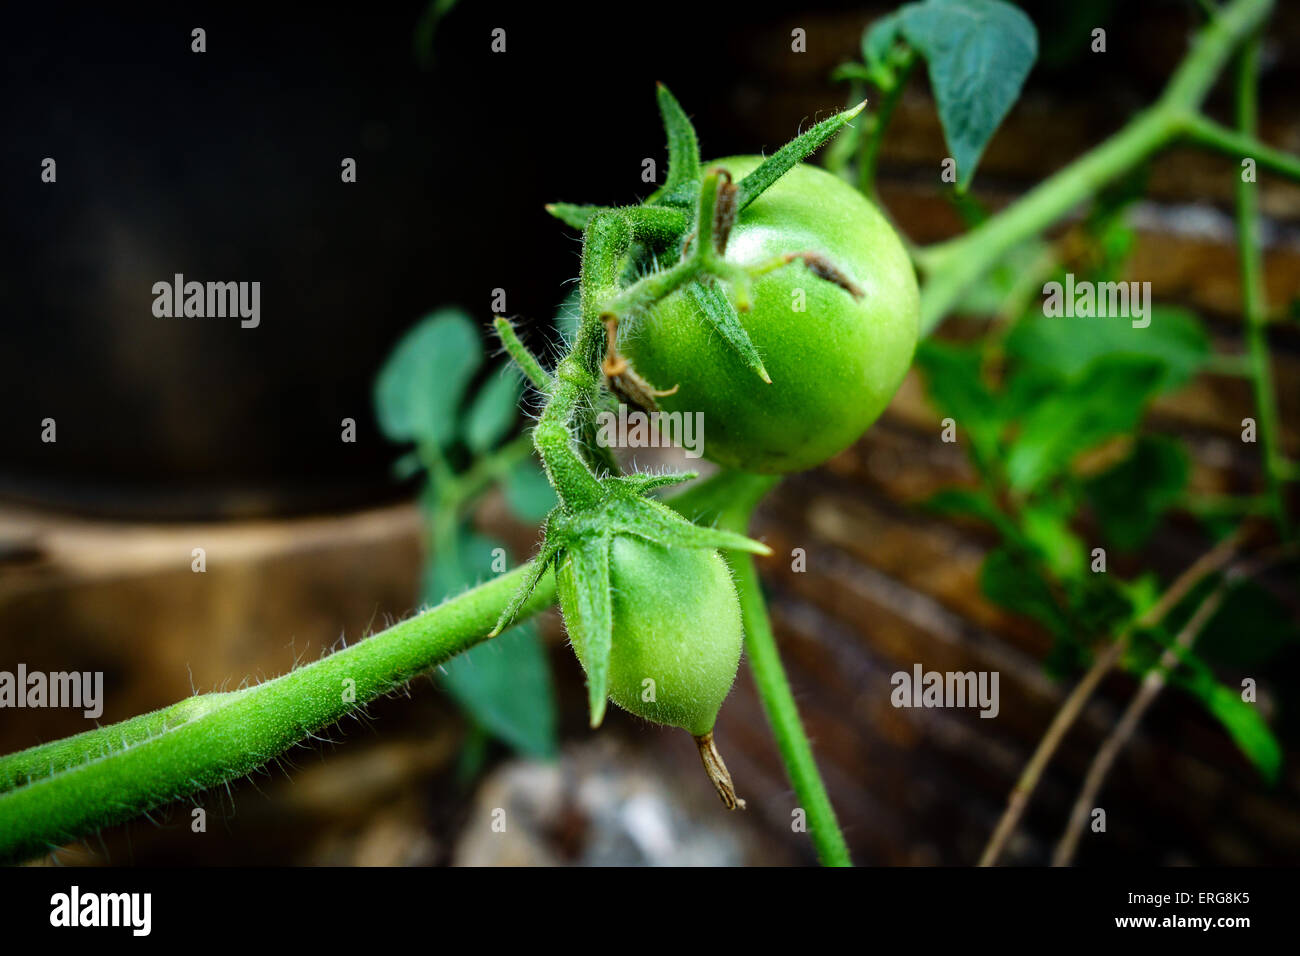 Green young tomatoes Stock Photo